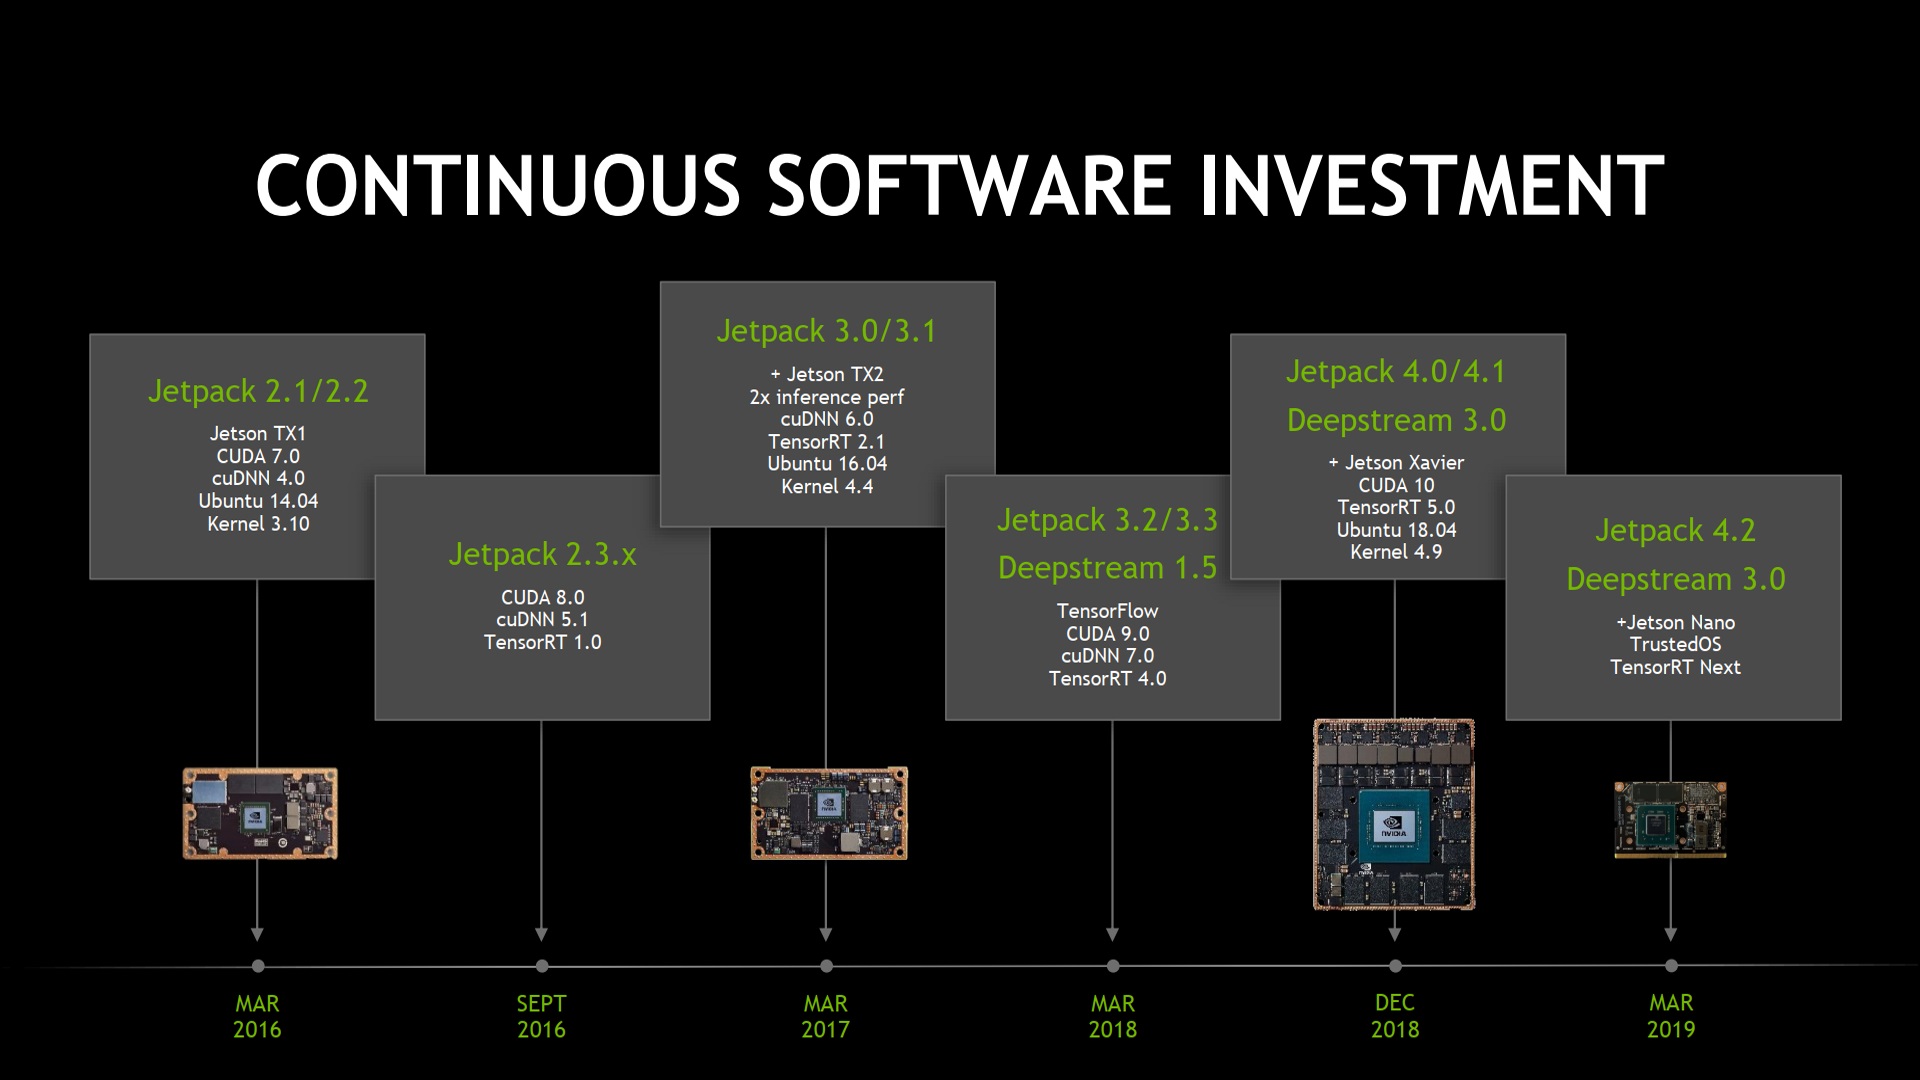 Software improvement and investment grapgh for the development of Jetpack and deepstream.